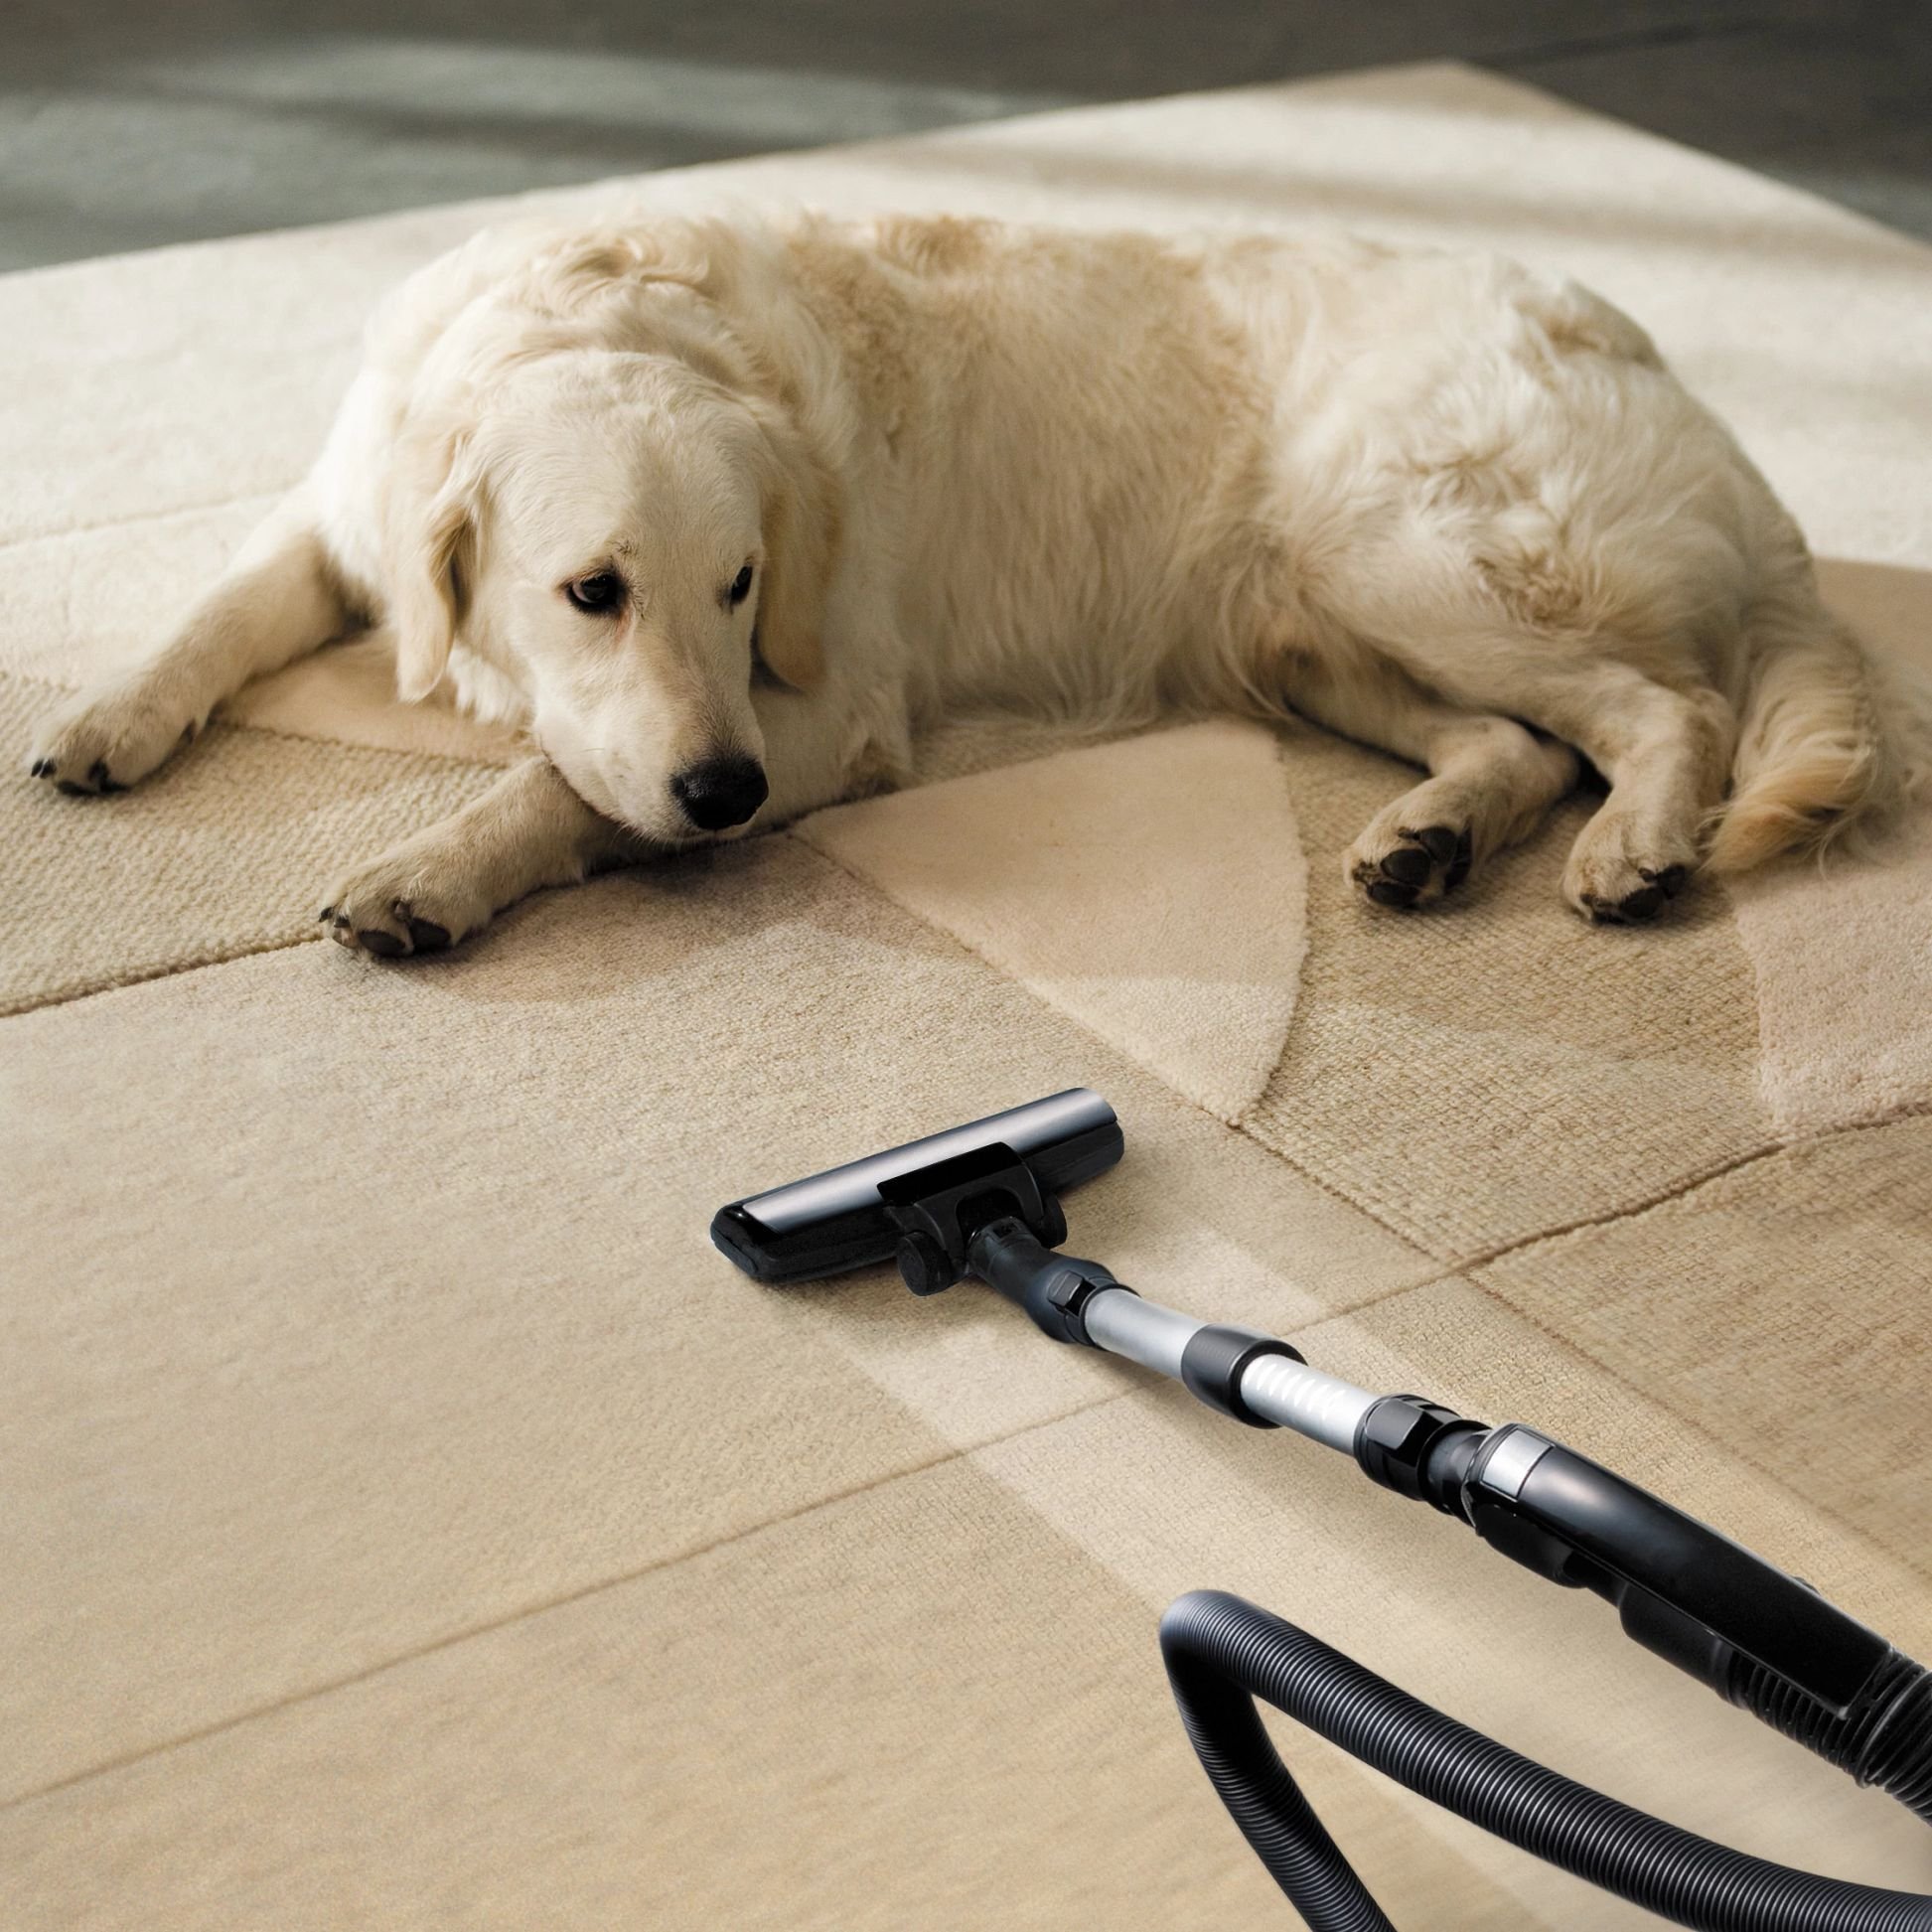 dog on rug being cleaned - Big Dog Flooring in Indianapolis, IN